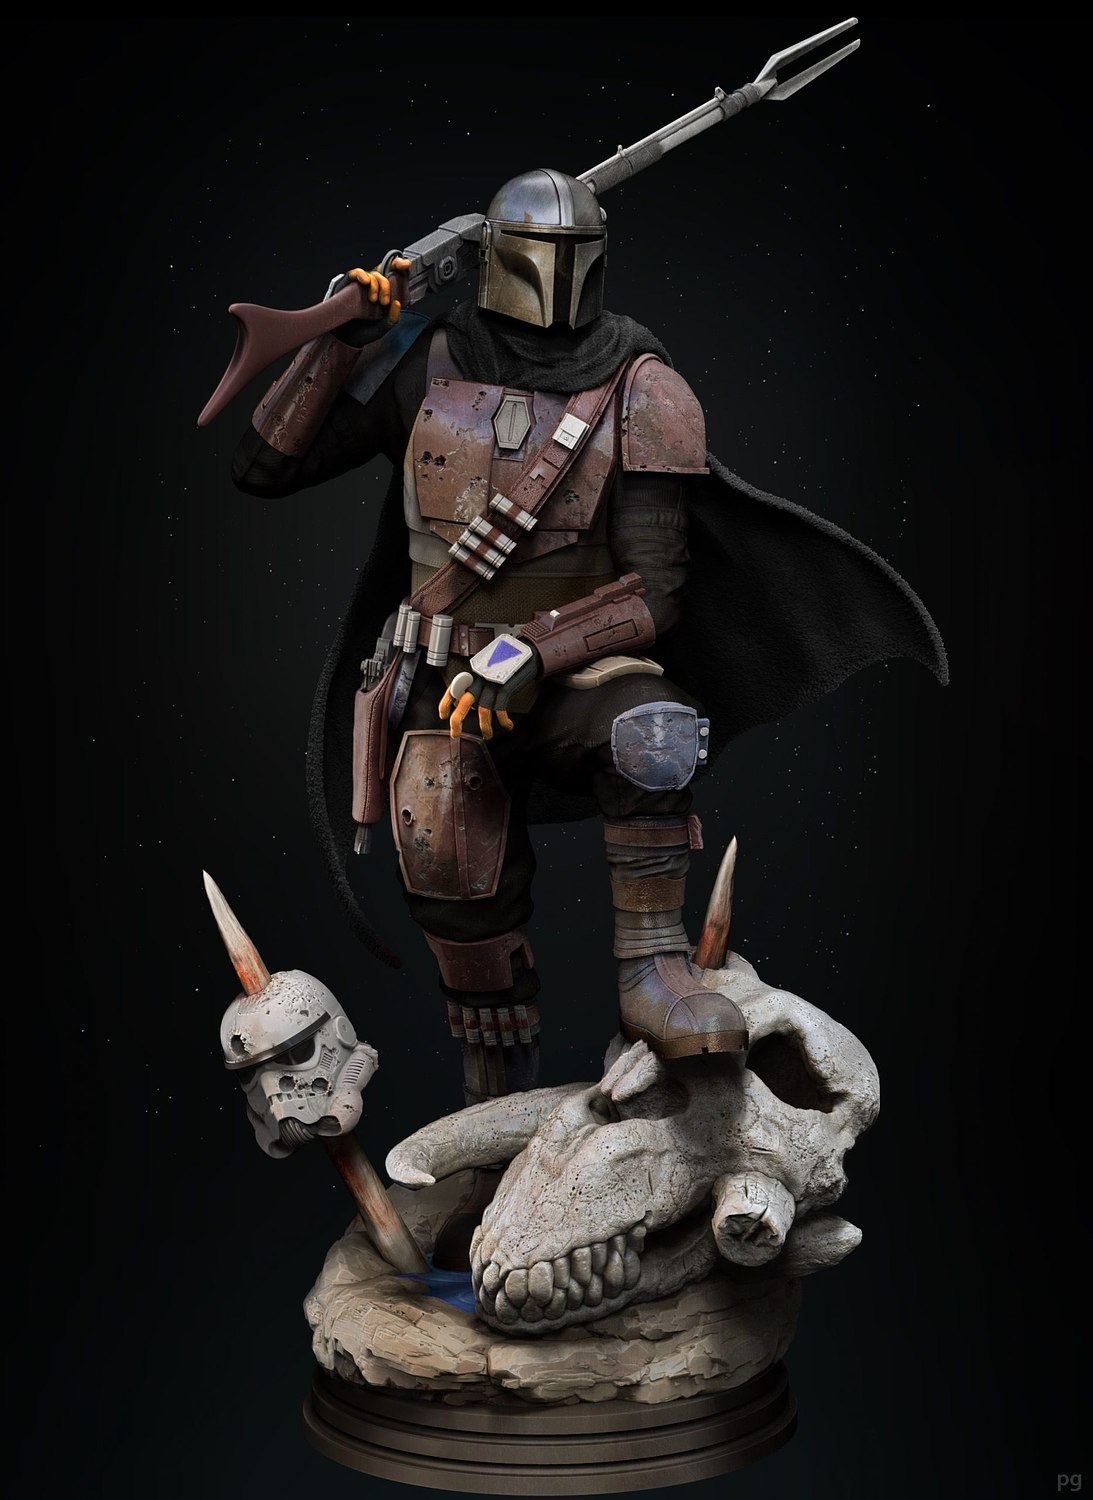 The Mandalorian Classic Armor From Star Wars